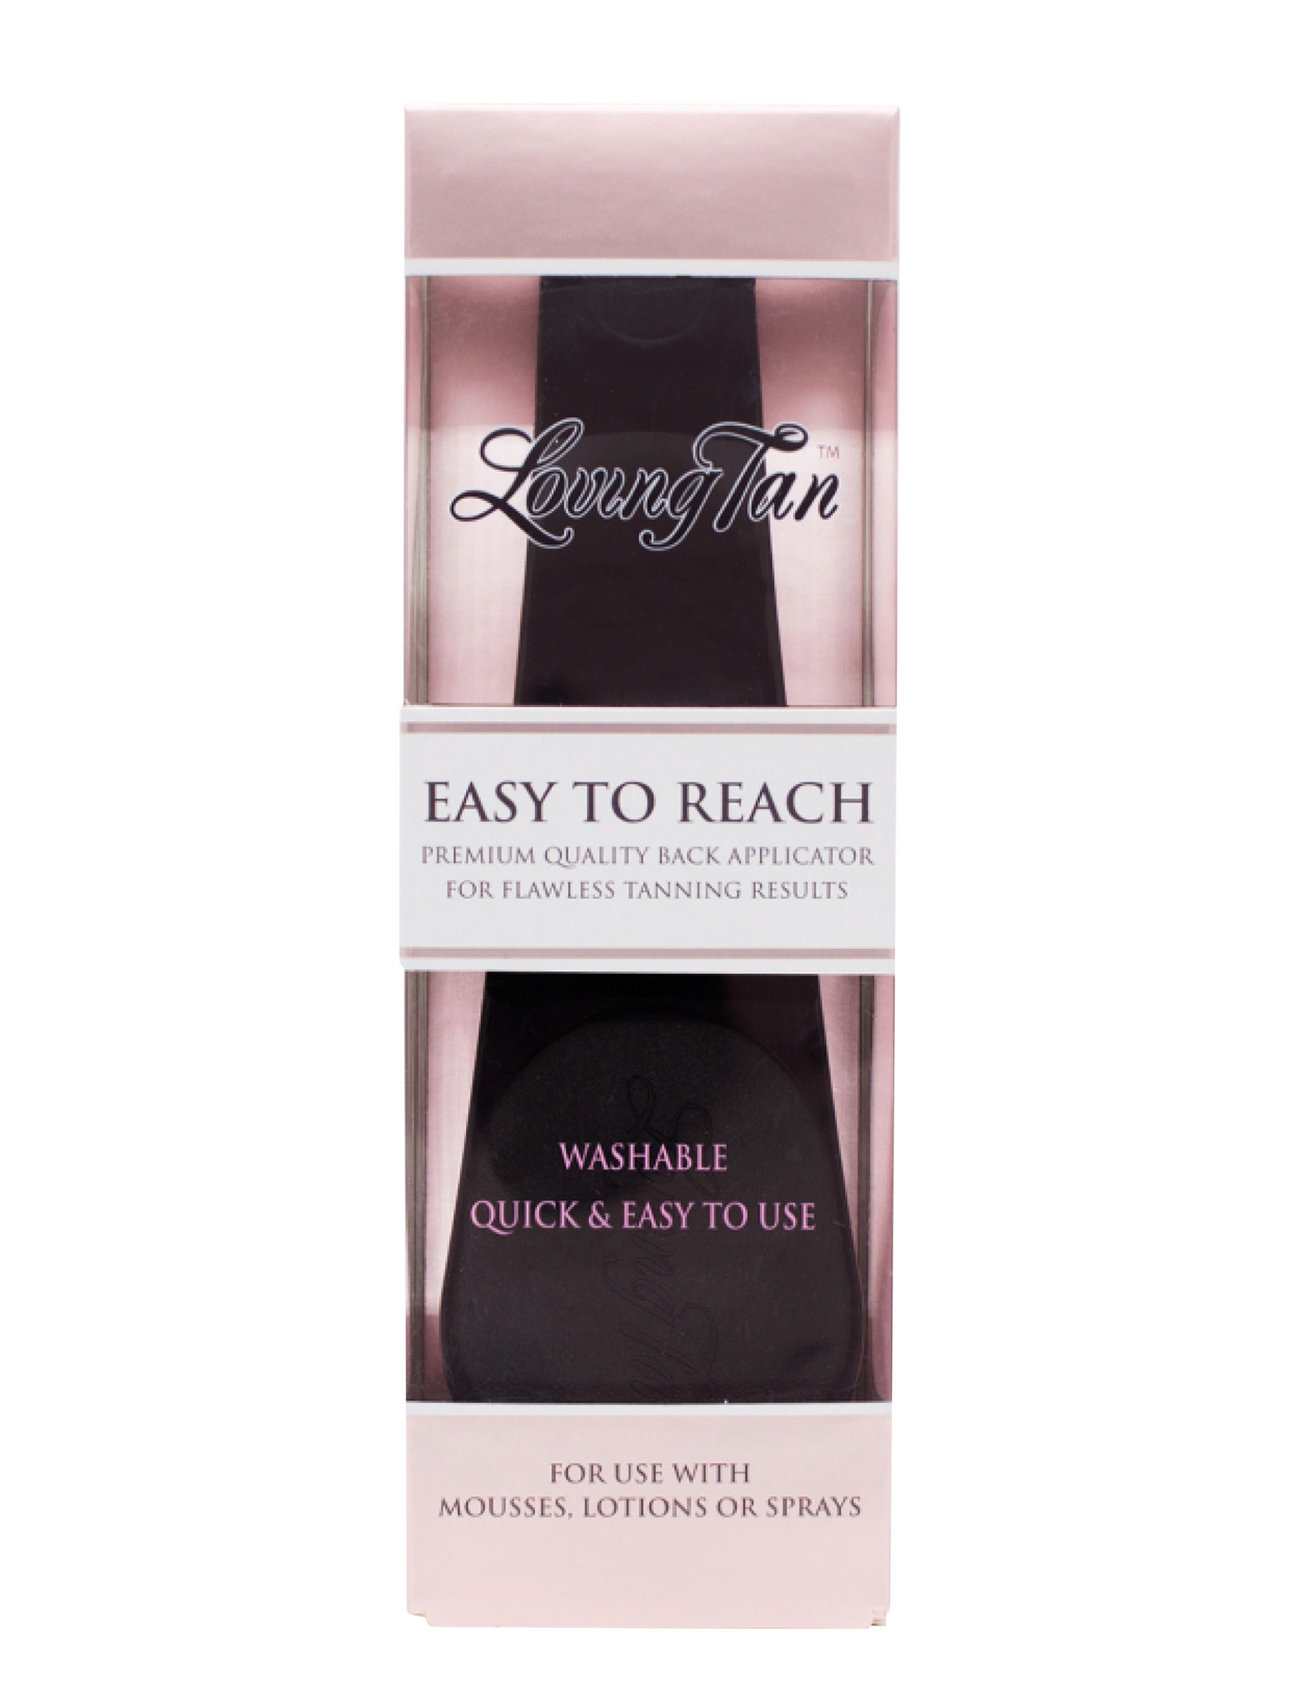 Easy To Reach Back Applicator Beauty Women Skin Care Sun Products Self Tanners Accessories Nude Loving Tan